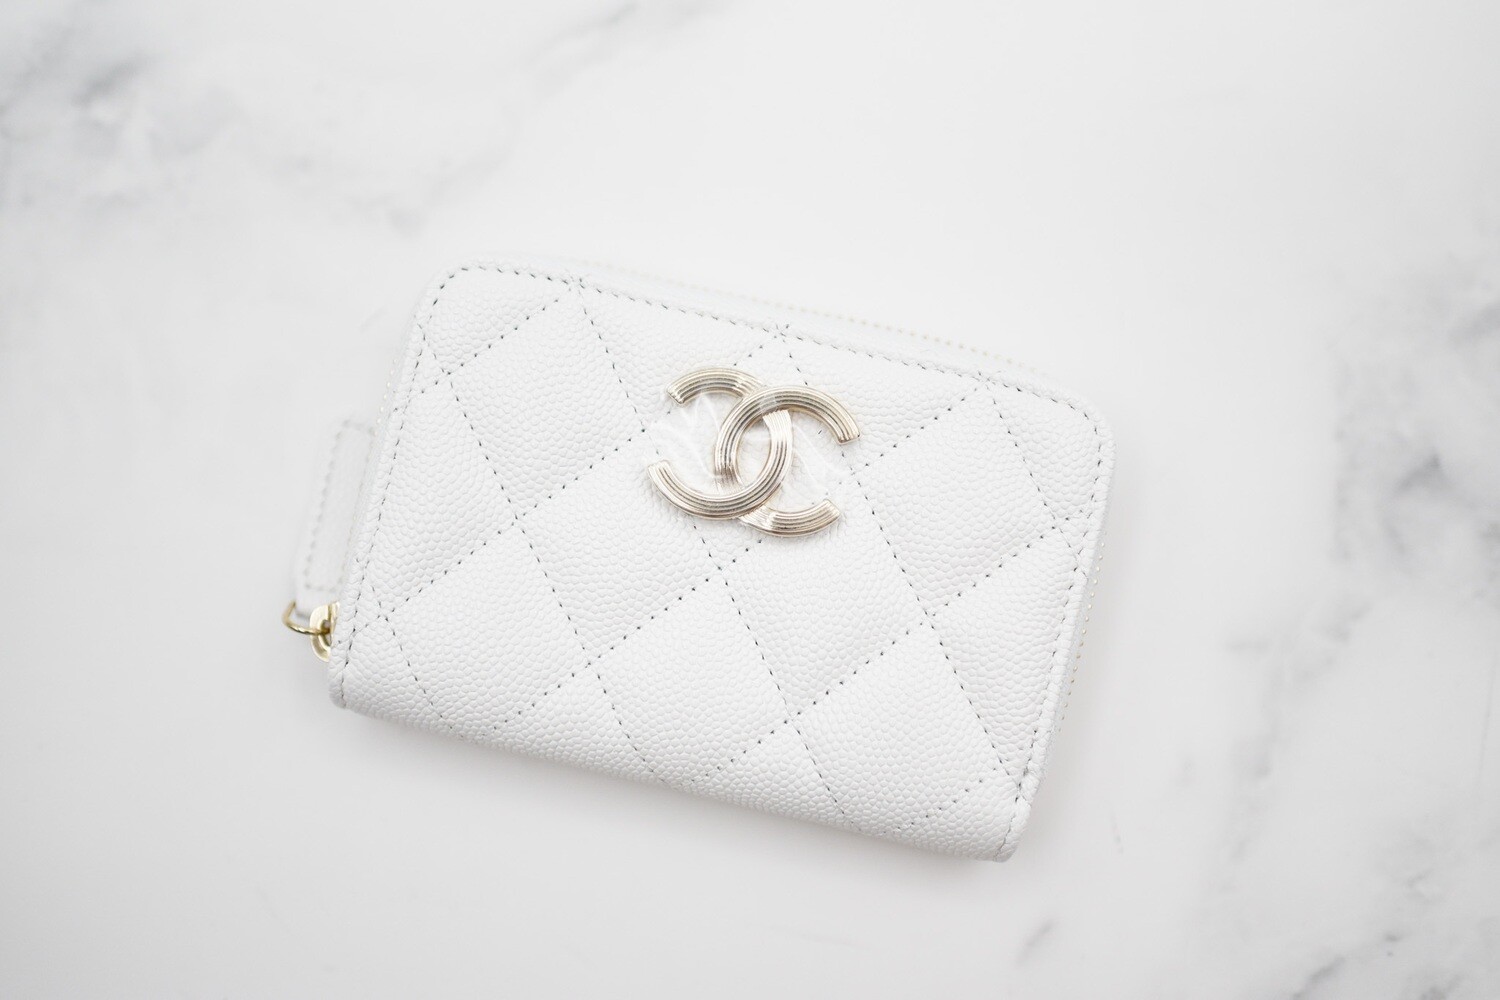 Chanel SLG Zip Cardholder, Large CC, White Caviar Leather with Gold Hardware, New in Box GA001